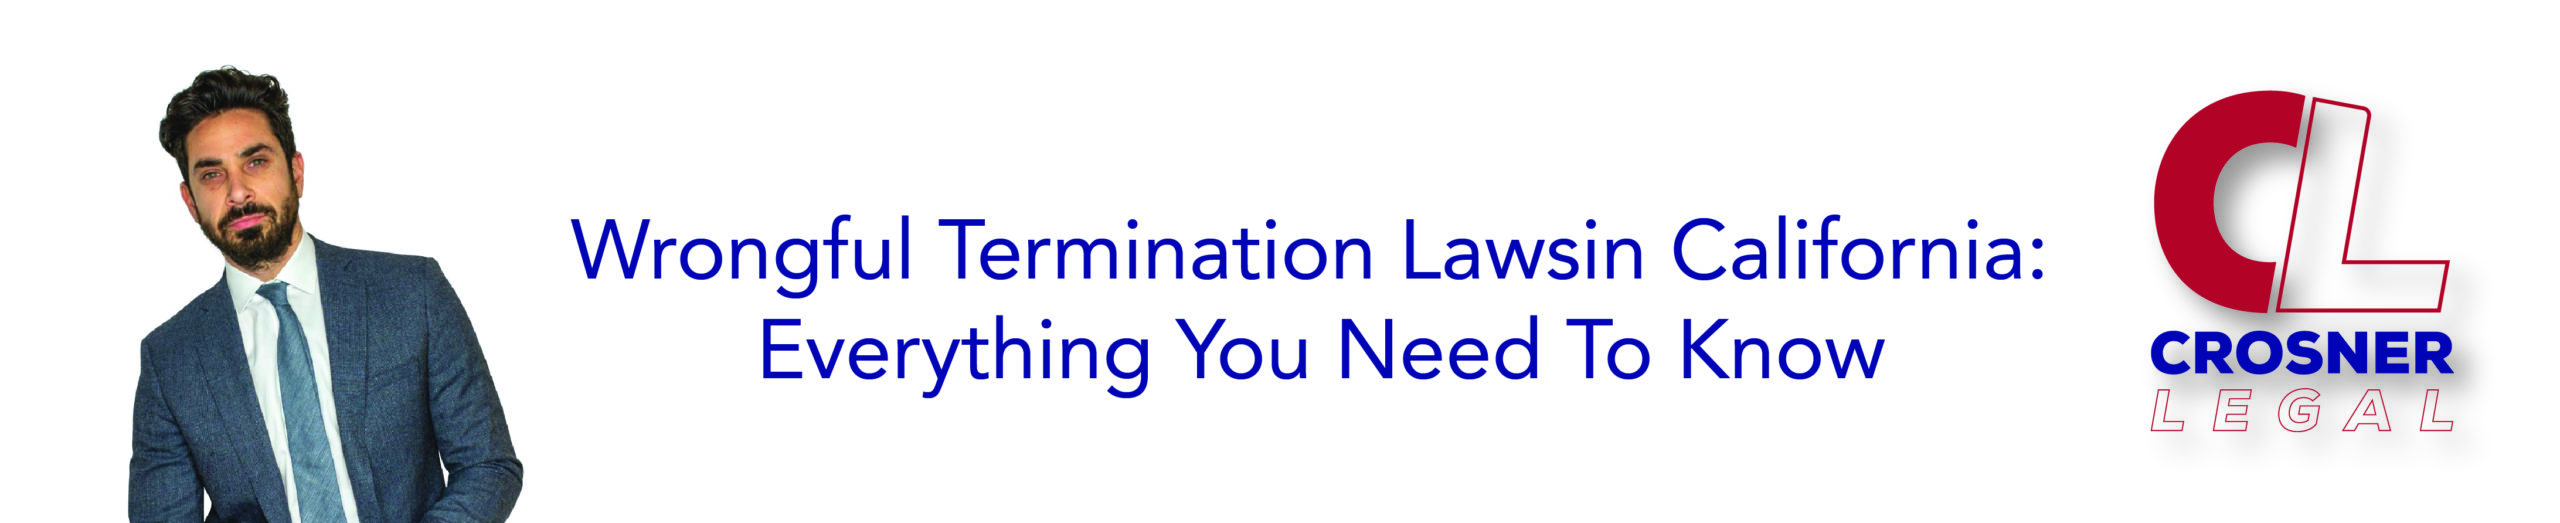 Wrongful Termination Laws in California: Everything You Need To Know